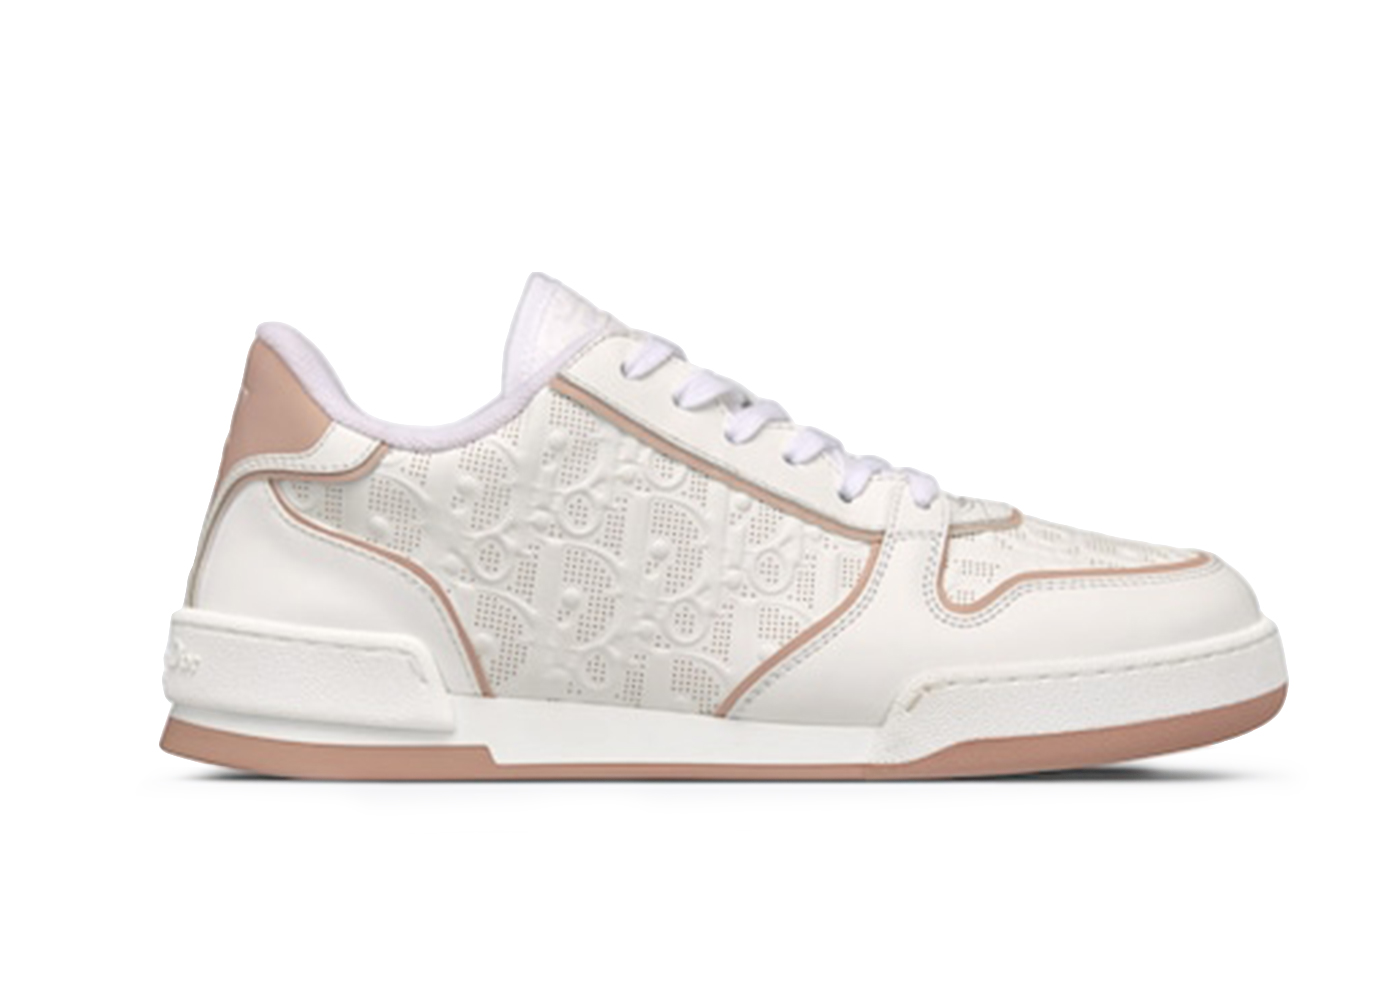 Dior One White and Nude Dior Oblique Perforated Calfskin 